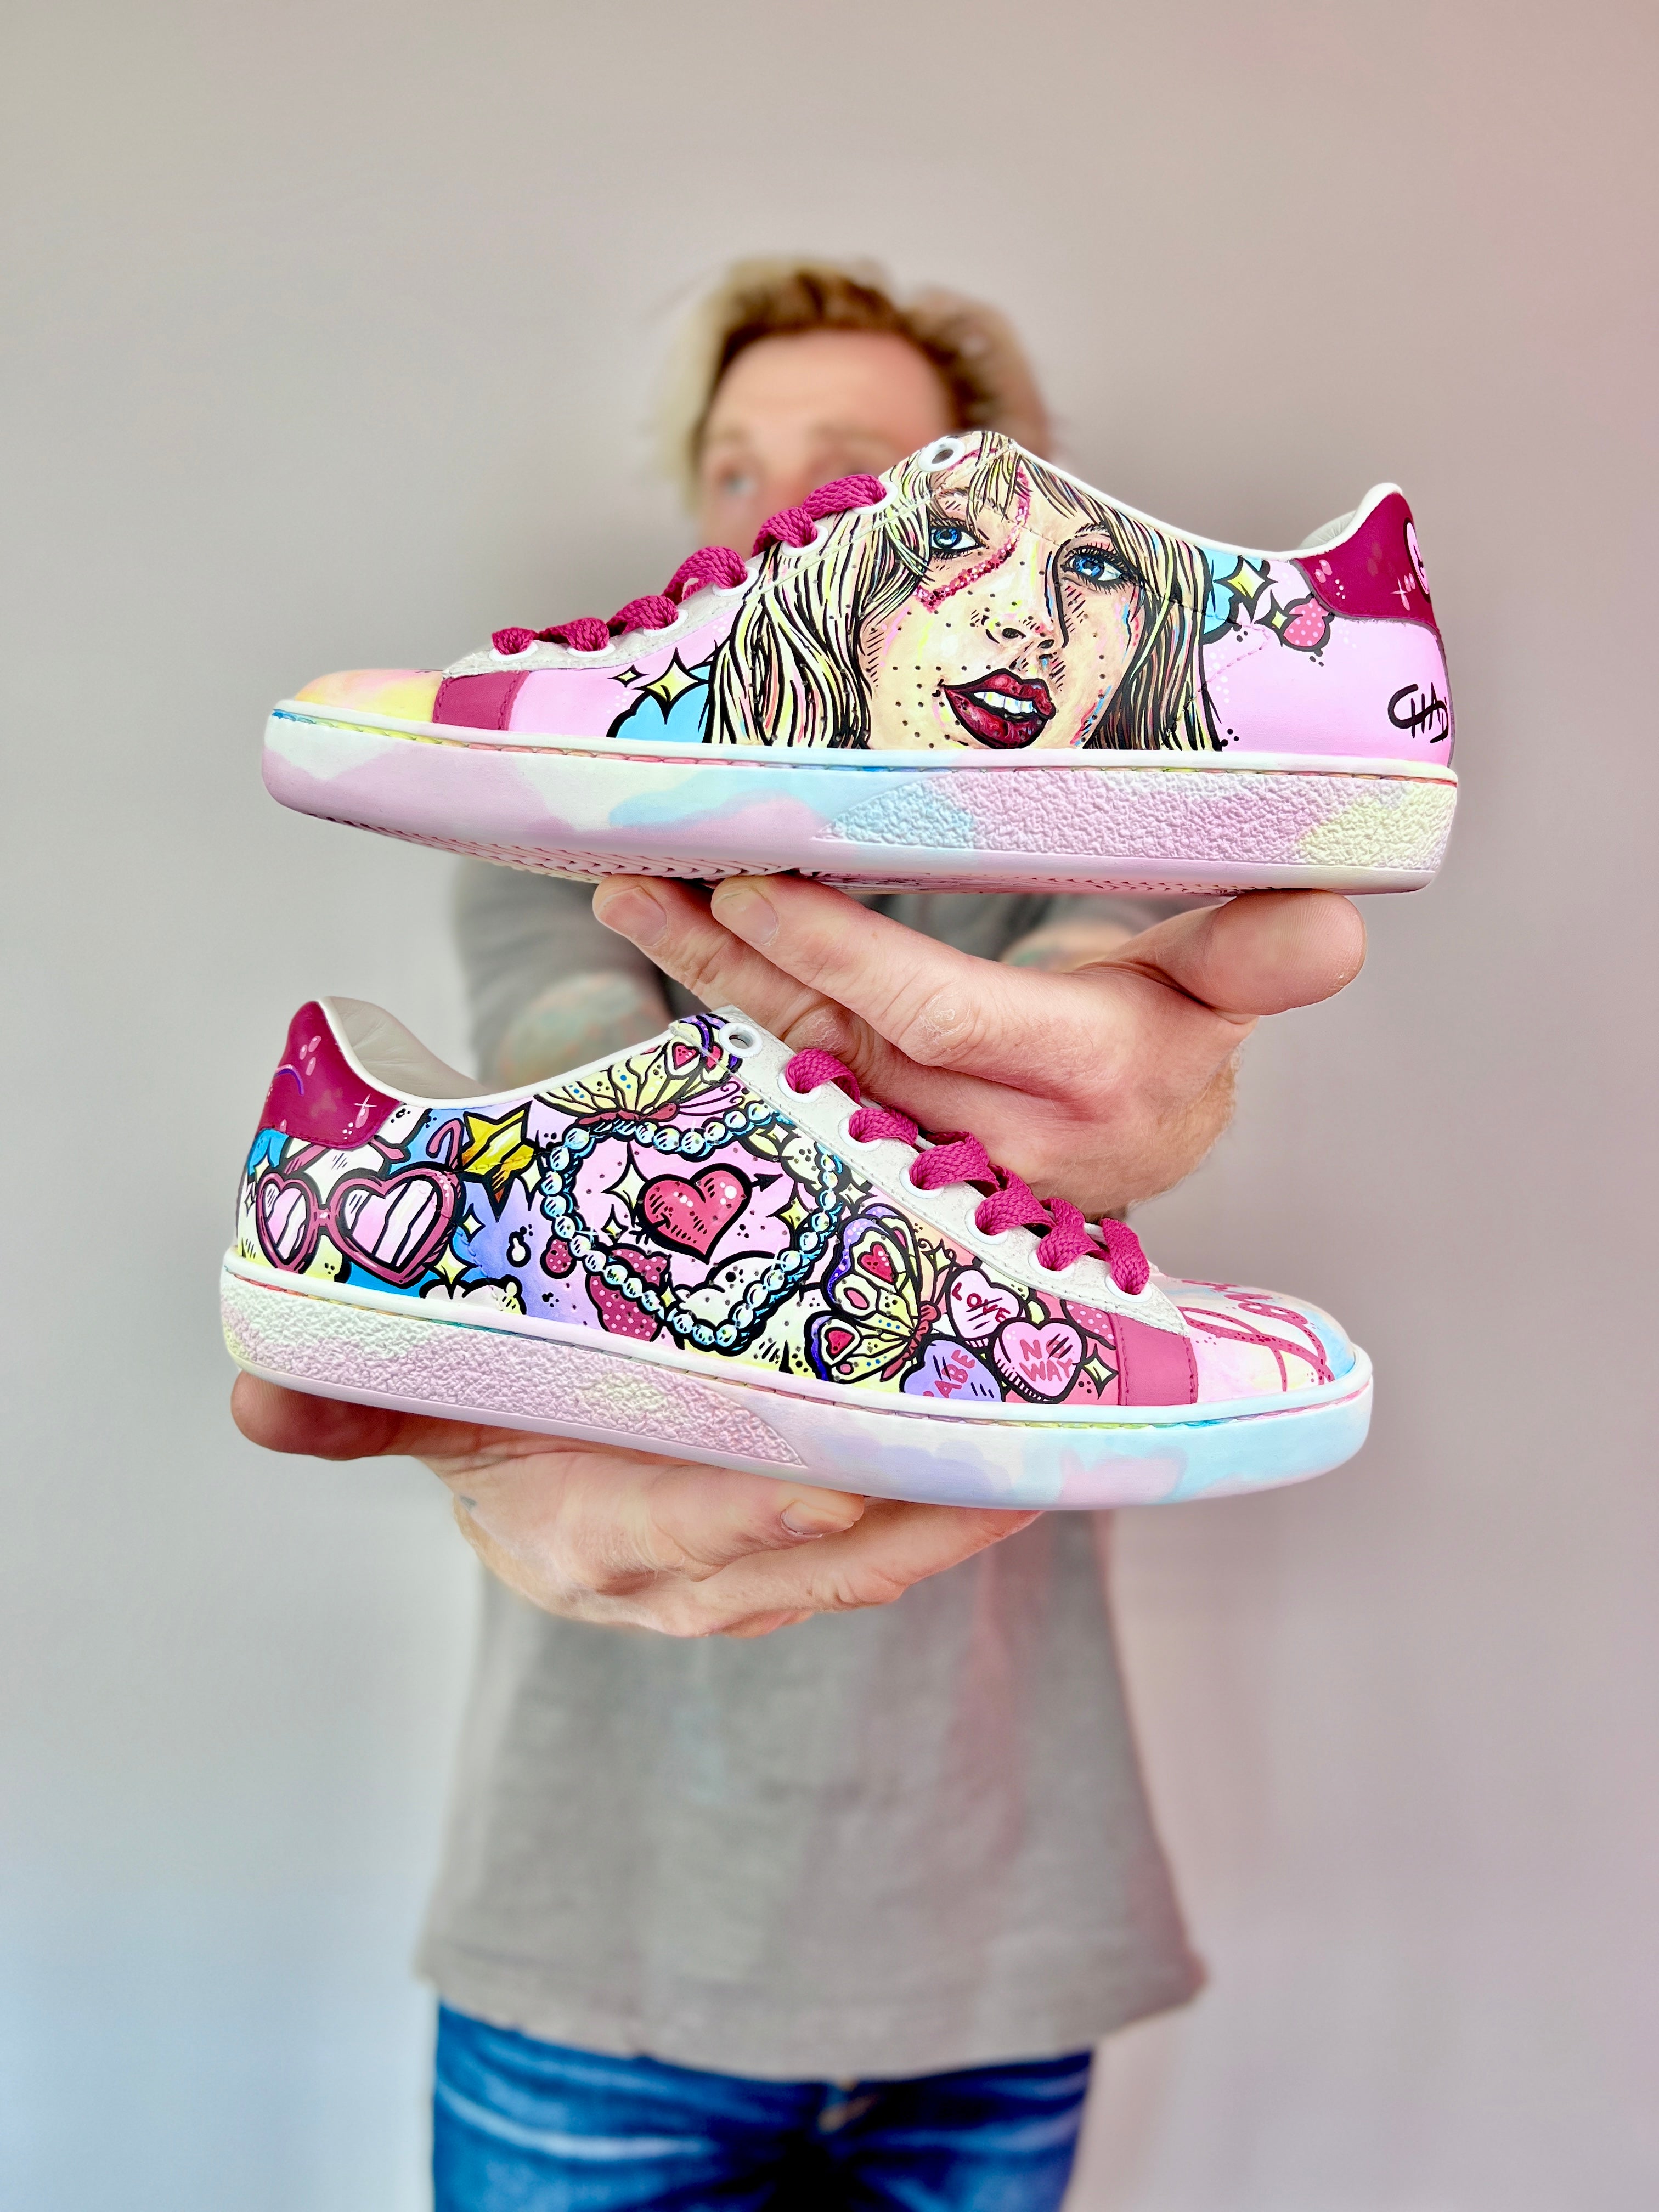 Gucci Taylor Swift sneakers